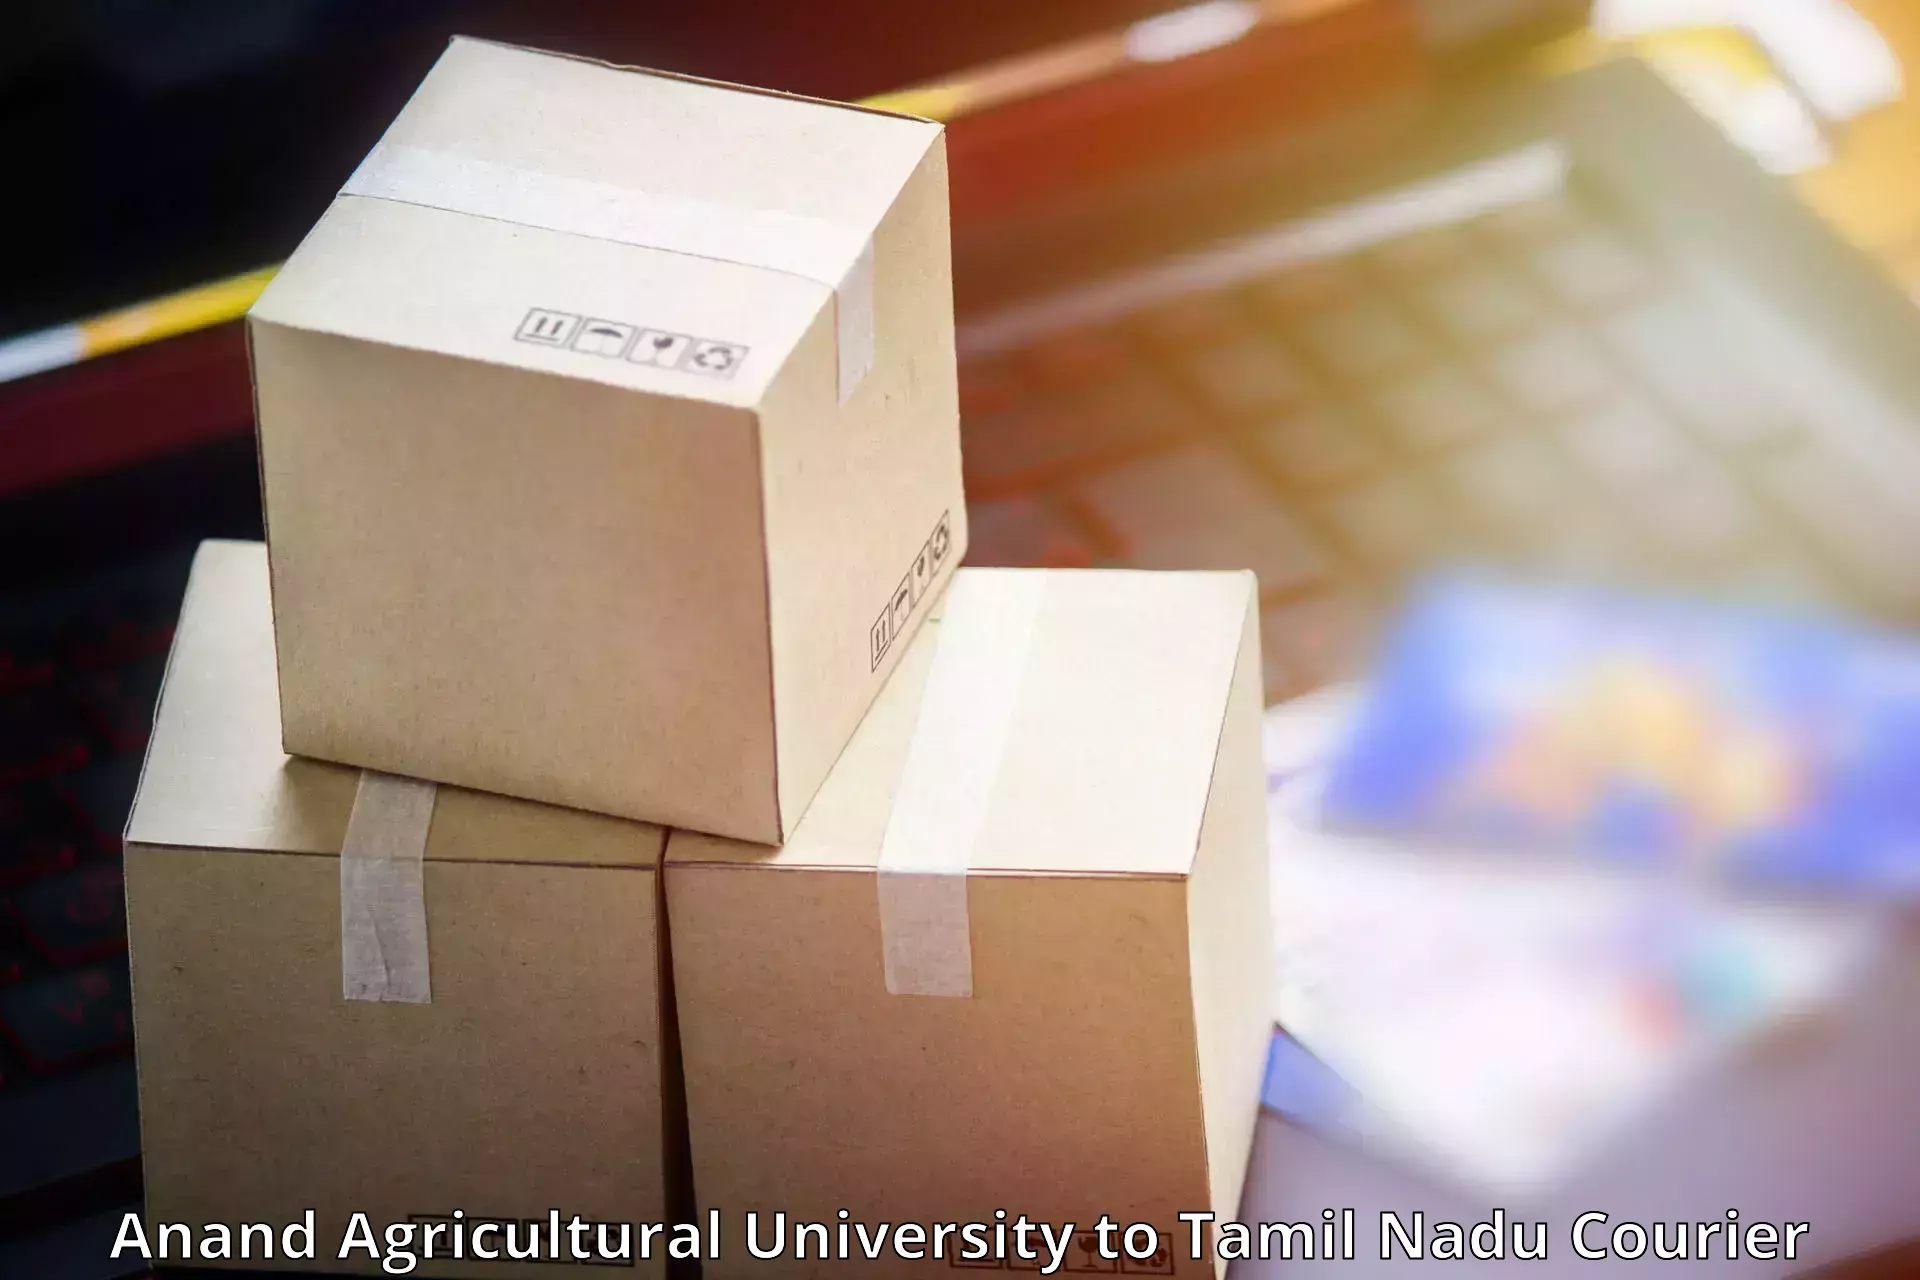 Bulk order courier Anand Agricultural University to Chennai Port